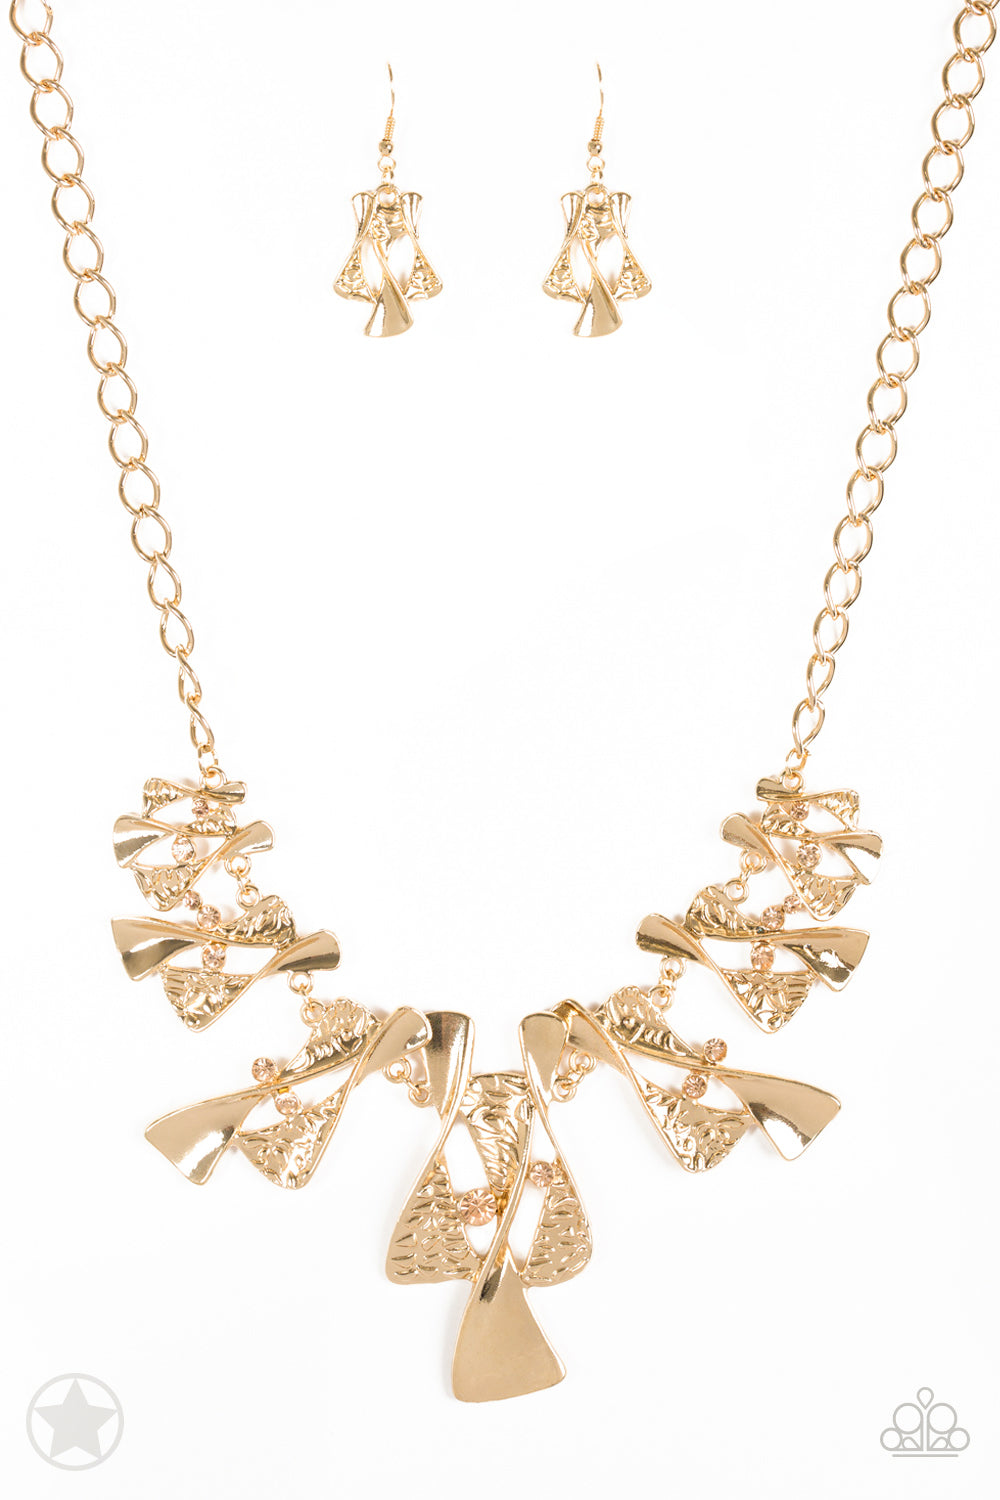 The Sands of Time Necklace by Paparazzi Accessories (Blockbuster)